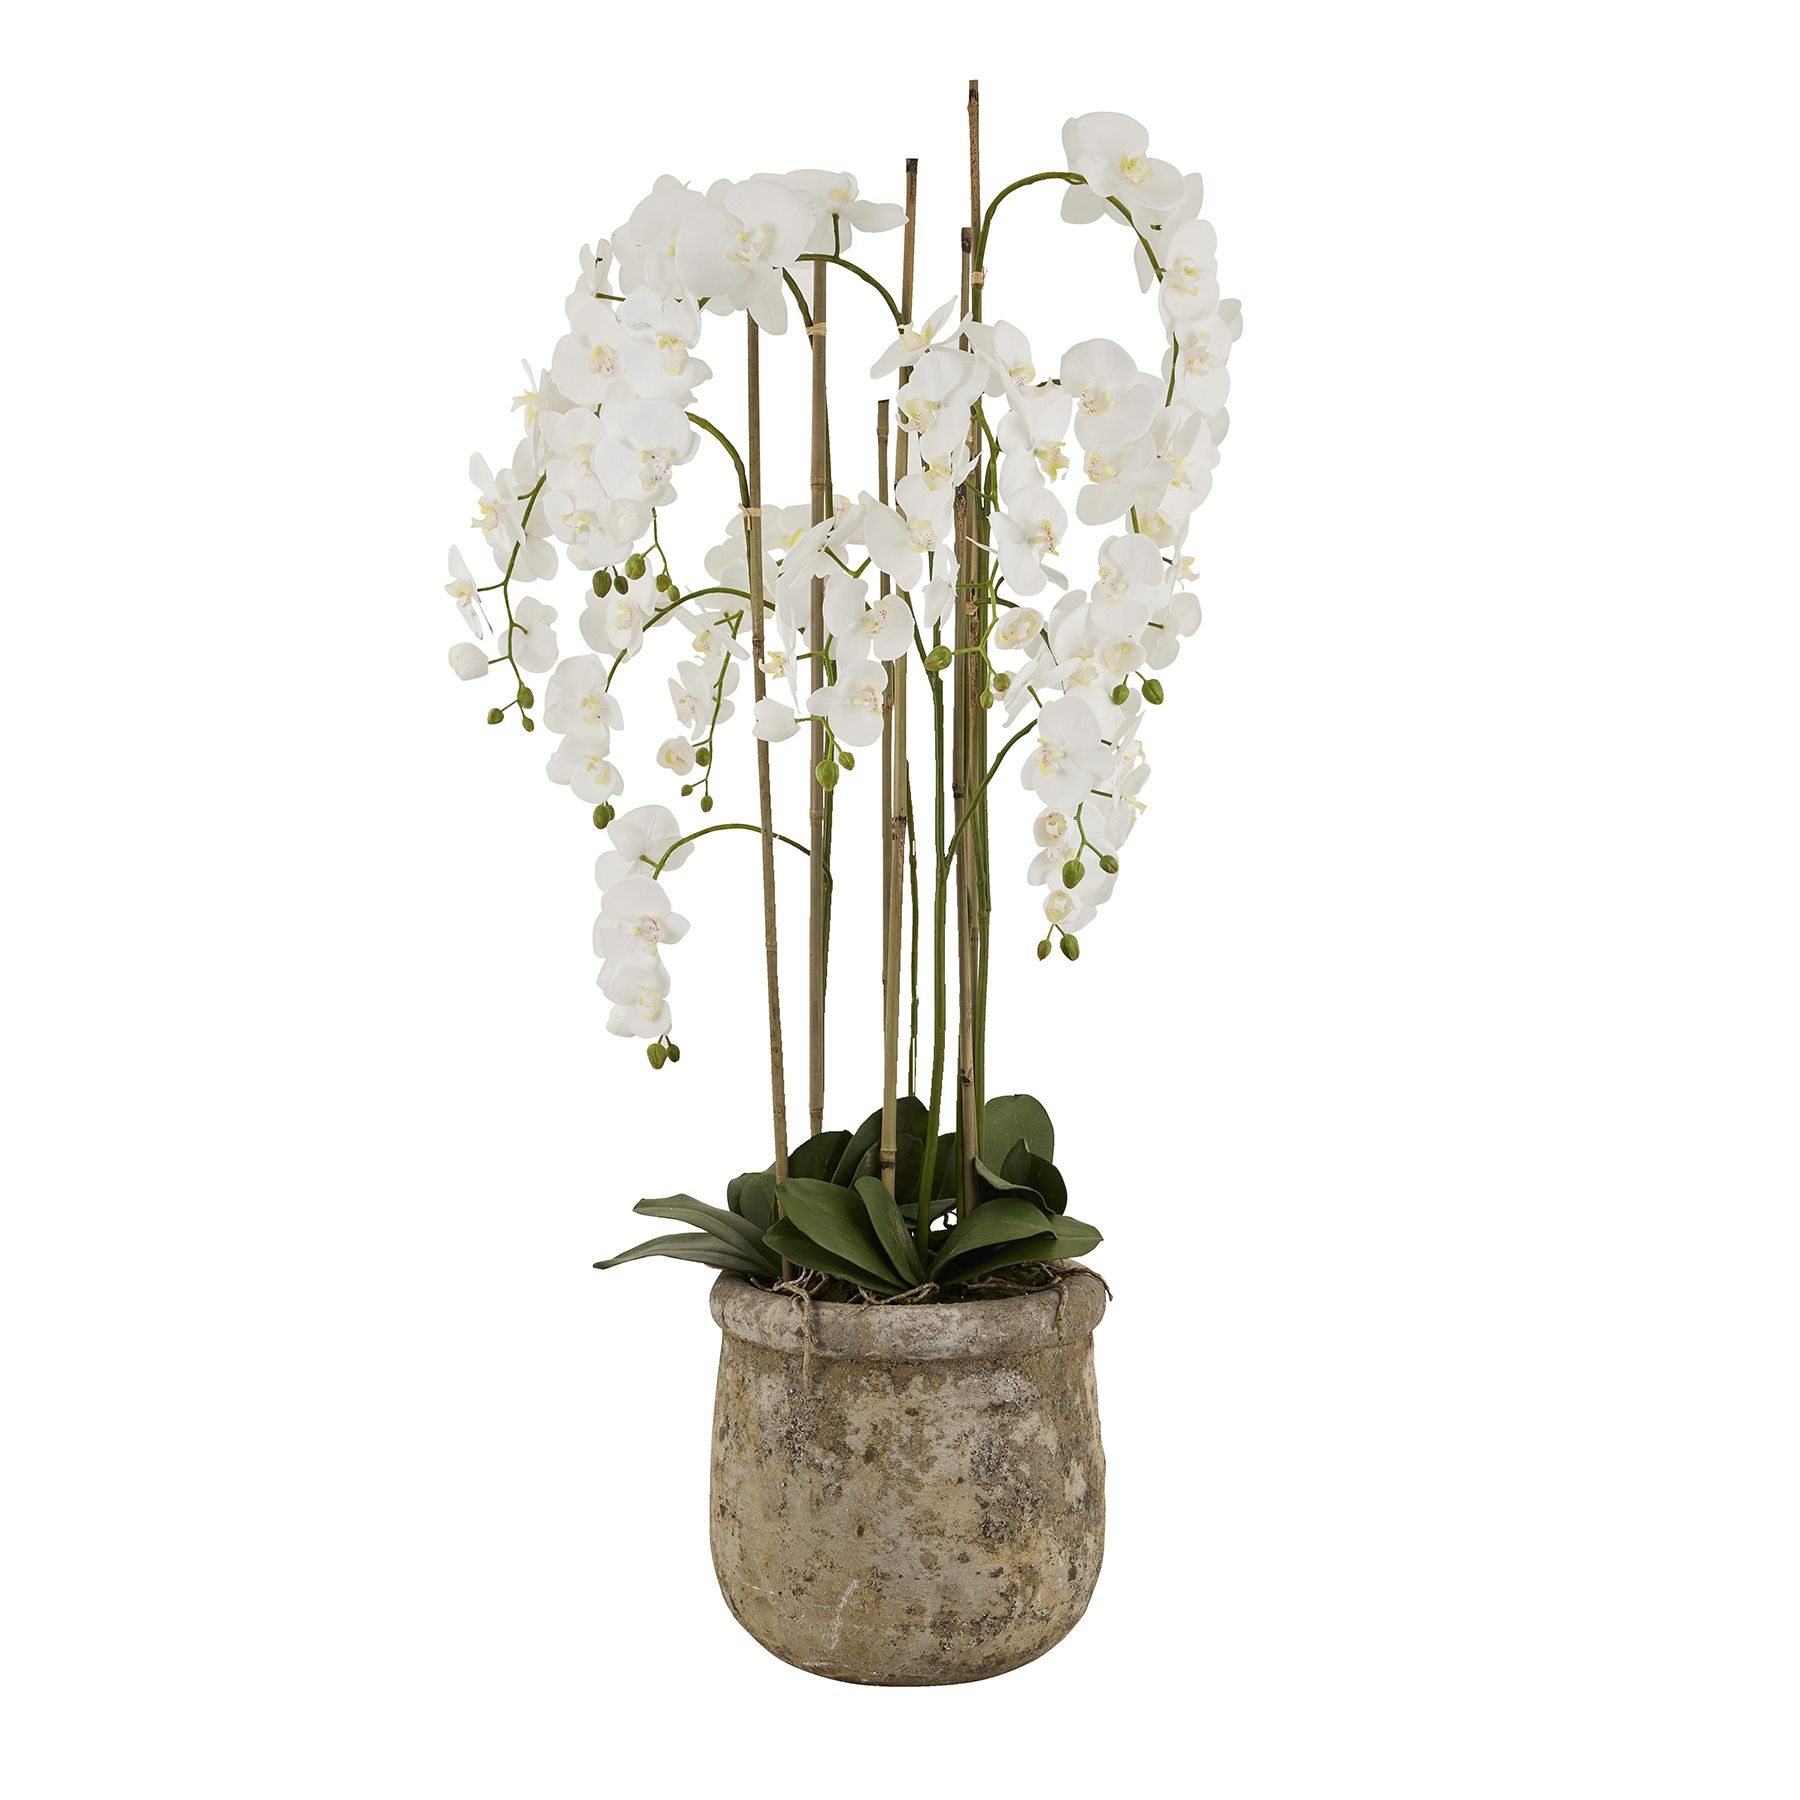 Large White Orchid In Antique Stone Pot - Image 1